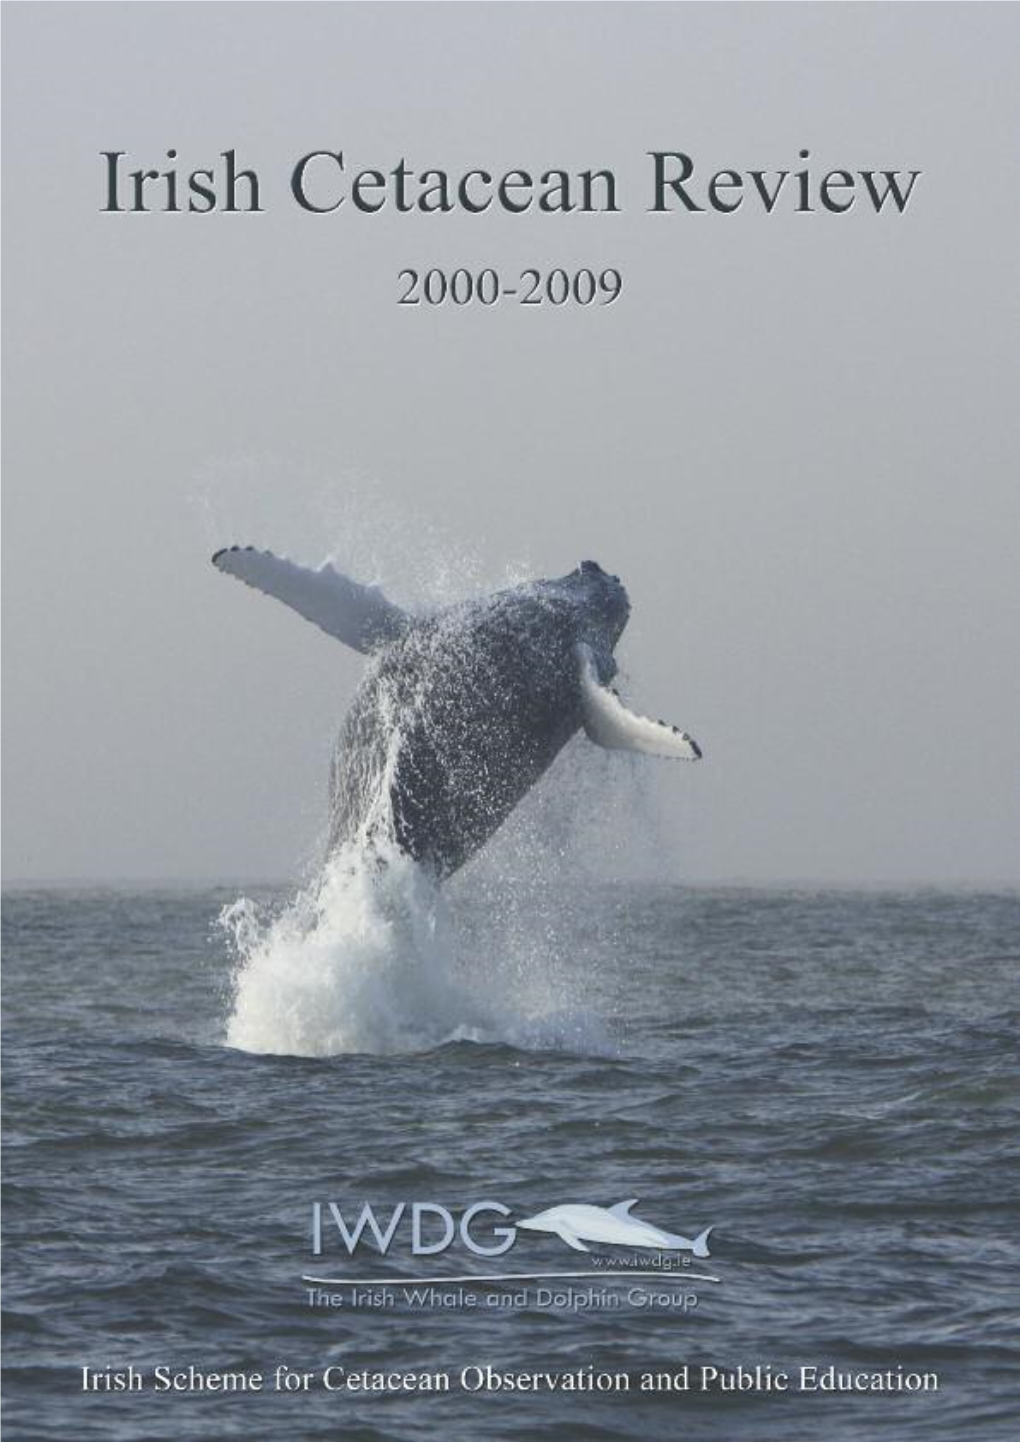 Irish Cetacean Review 2000-2009, the Irish Whale and Dolphin Group